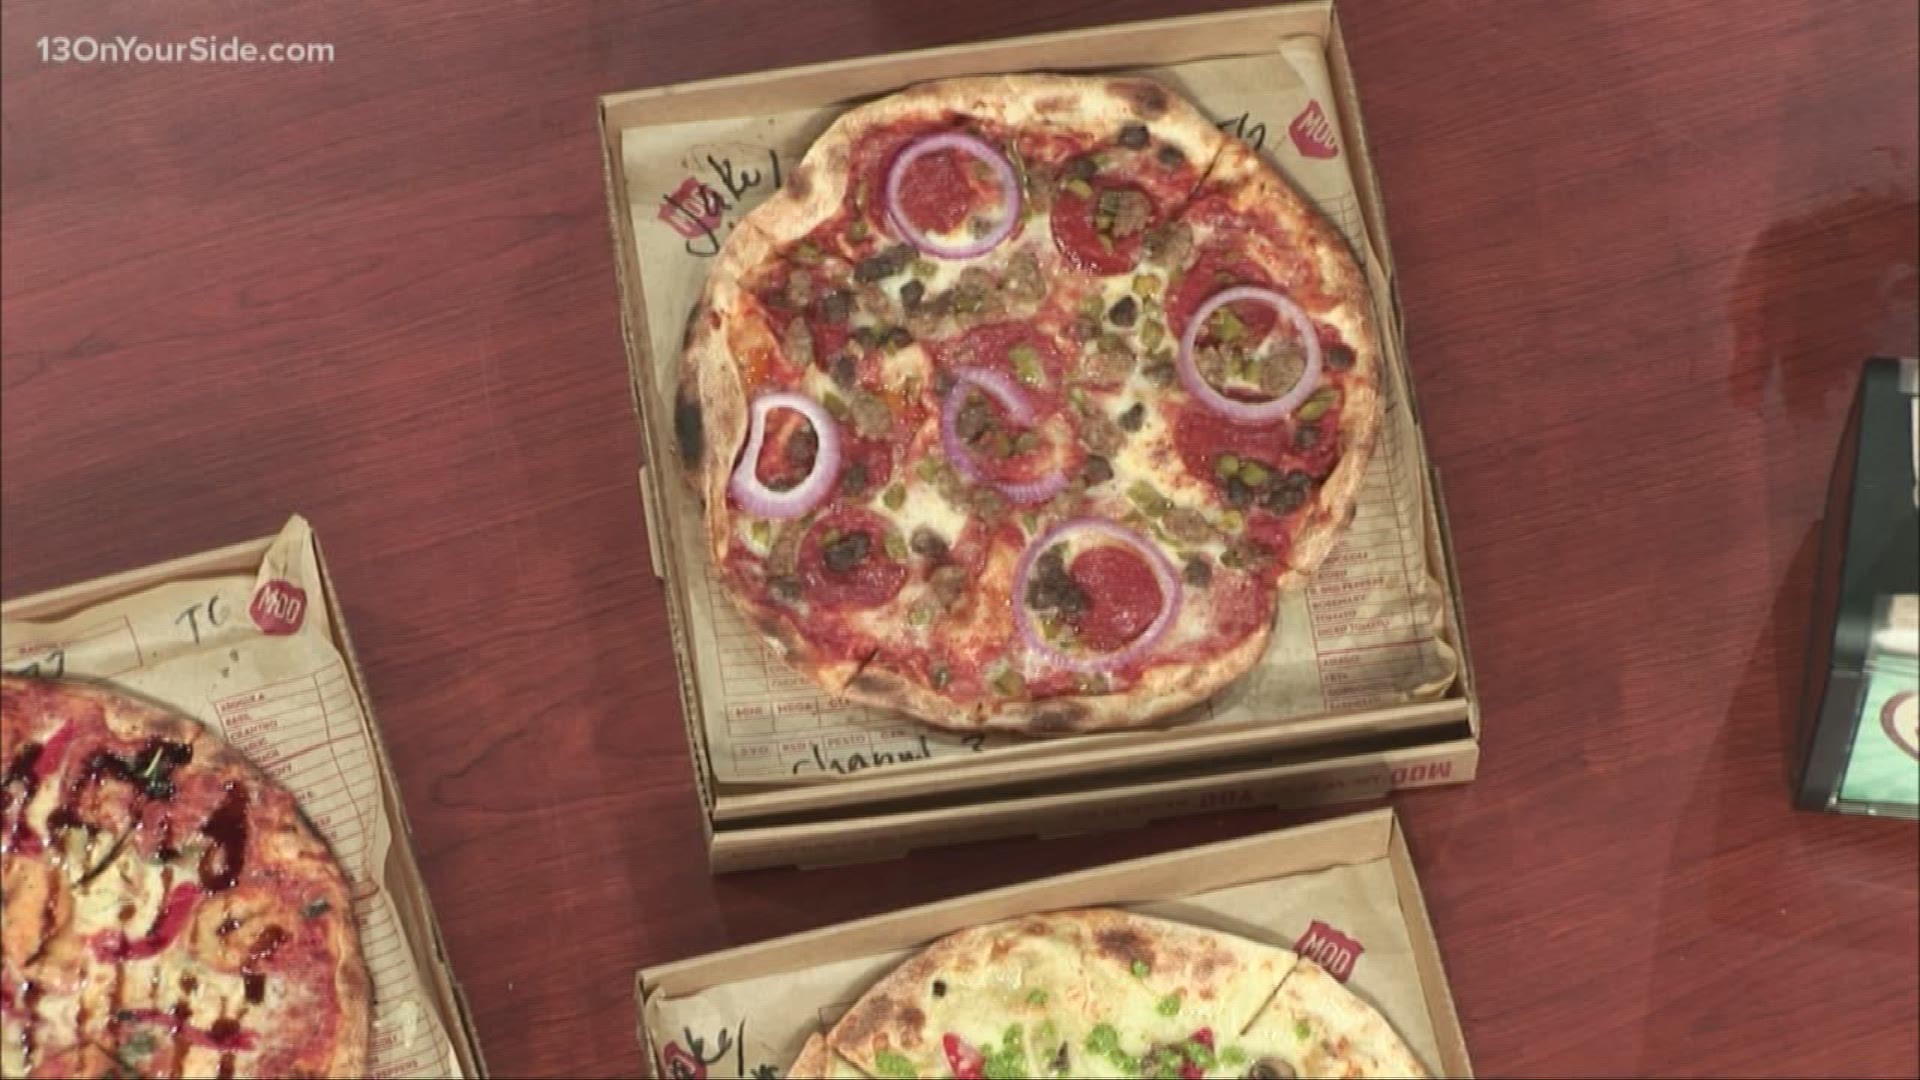 MOD Pizza has partnered up with New City Kids of Grand Rapids and the Community Healing Center in Kalamazoo to raise money for their organizations.